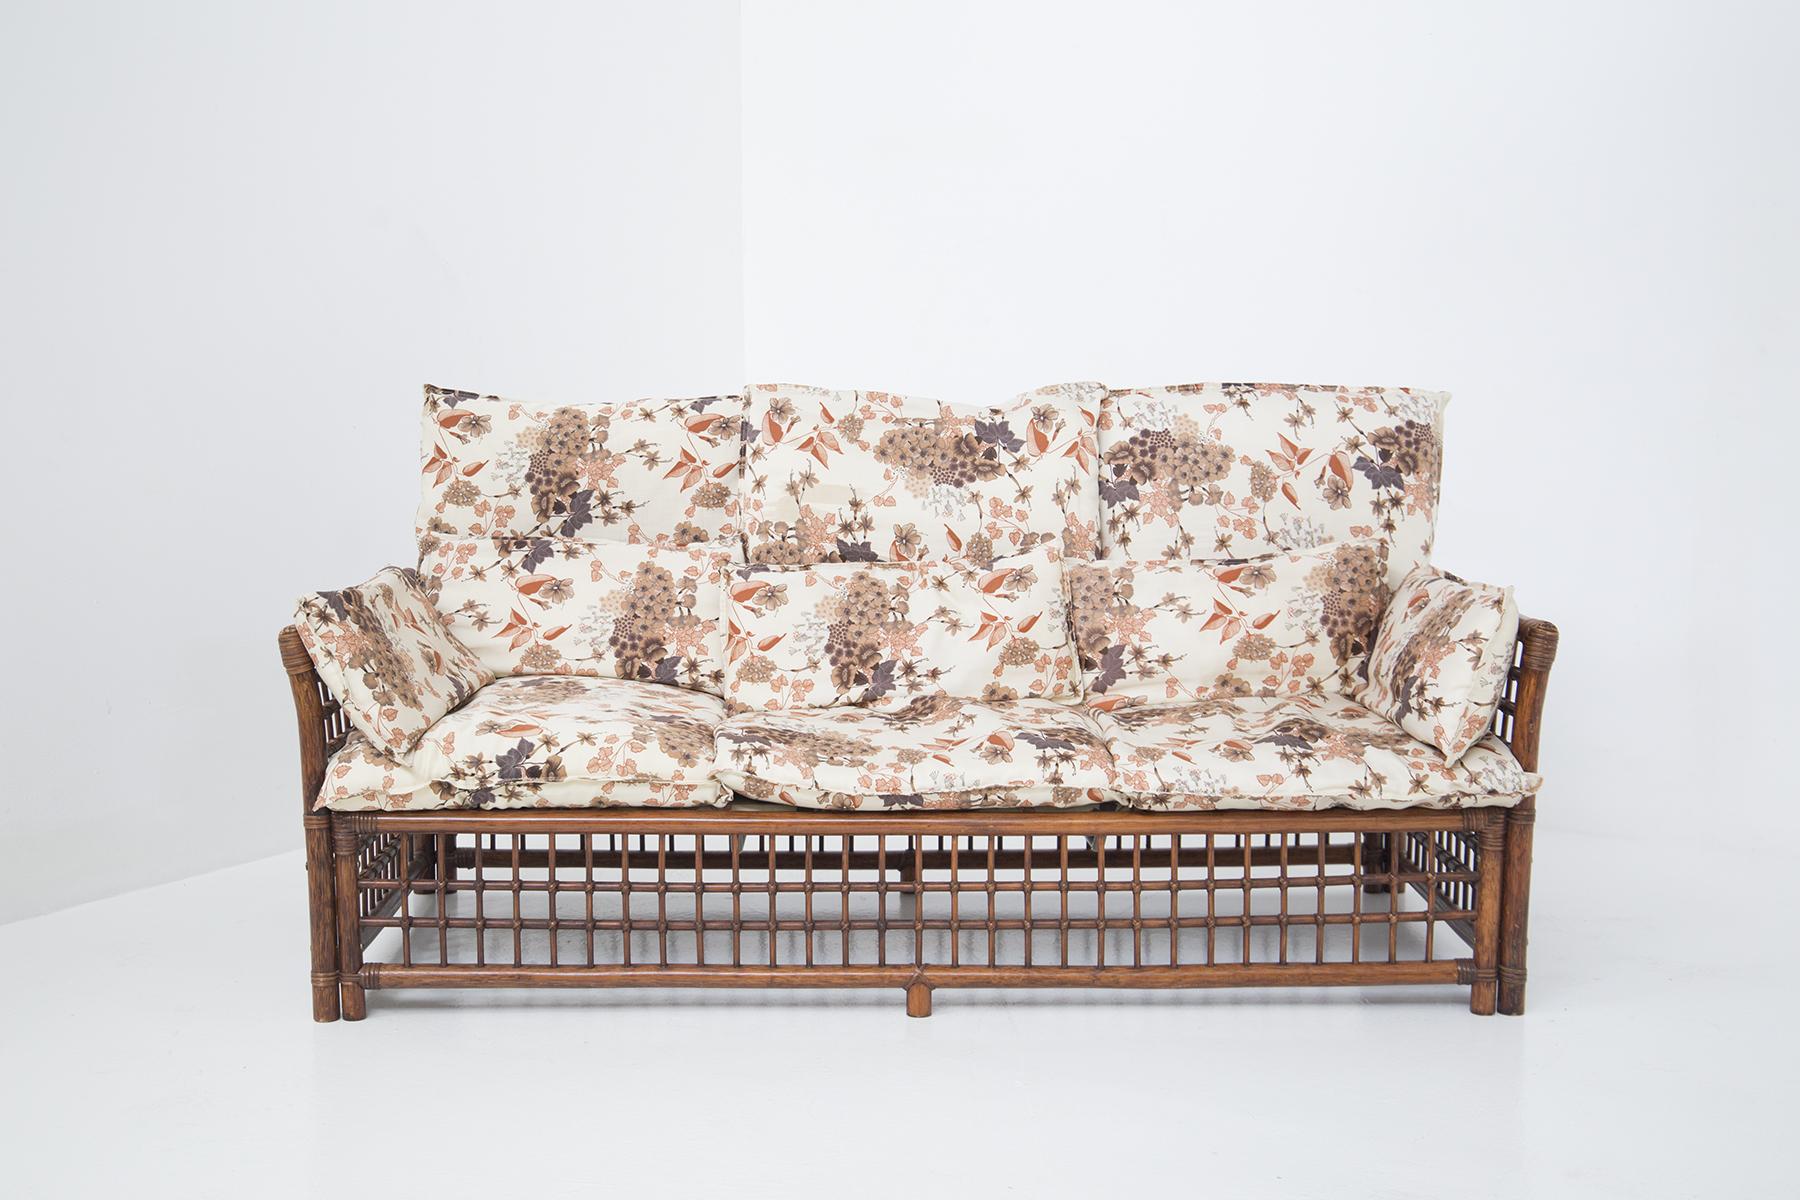 Vivai del Sud Vintage Wood and Rattan Sofa W Floral Fabric For Sale 5